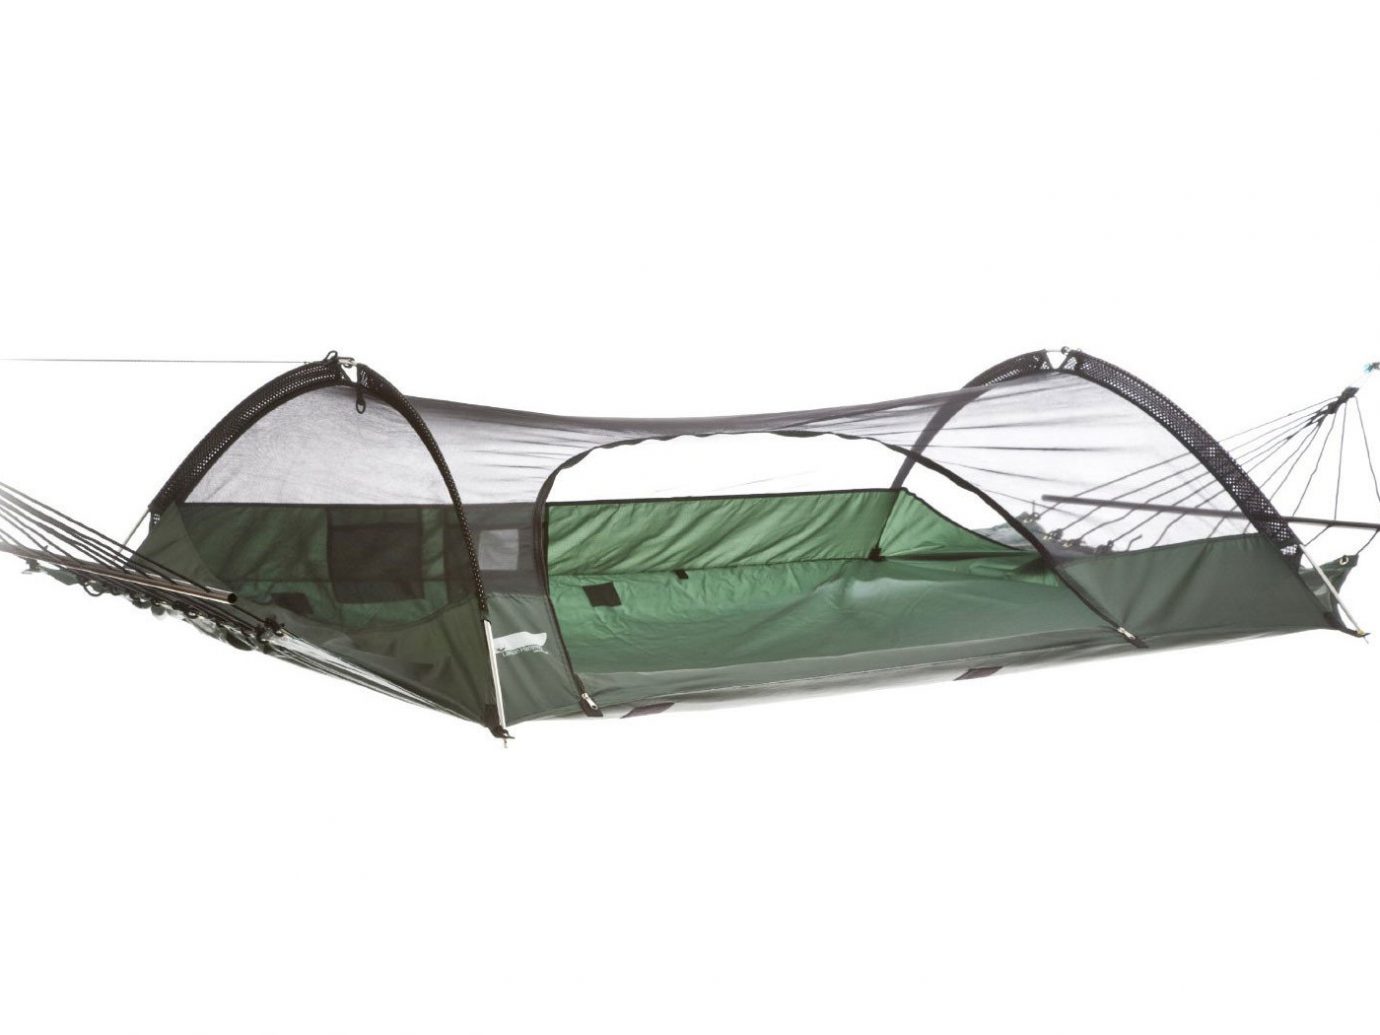 Style + Design tent product automotive exterior green net outdoor object canopy bed frame